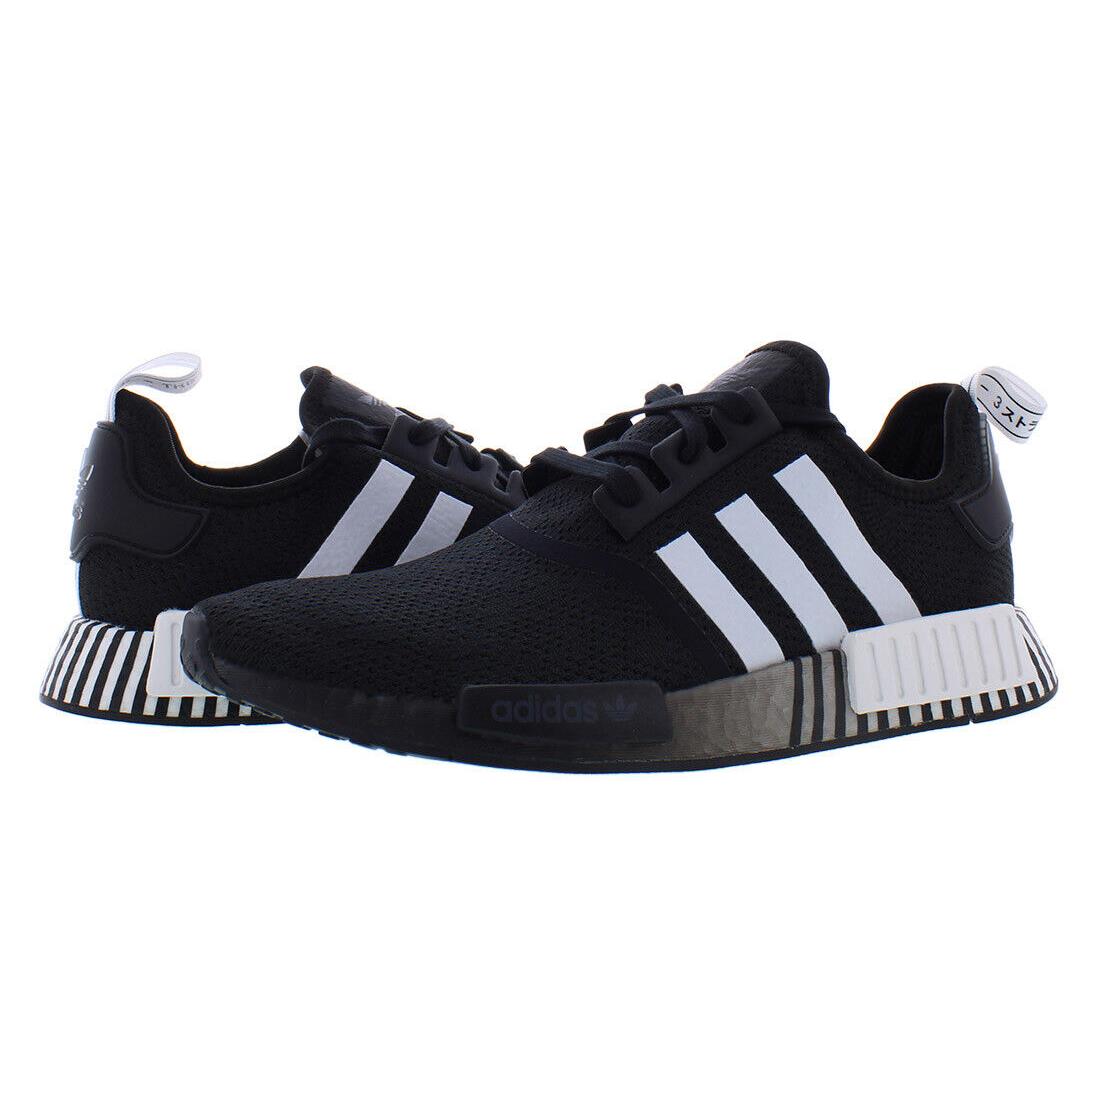 Adidas Nmd_R1 Mens Shoes Size 12 Color: Black/white